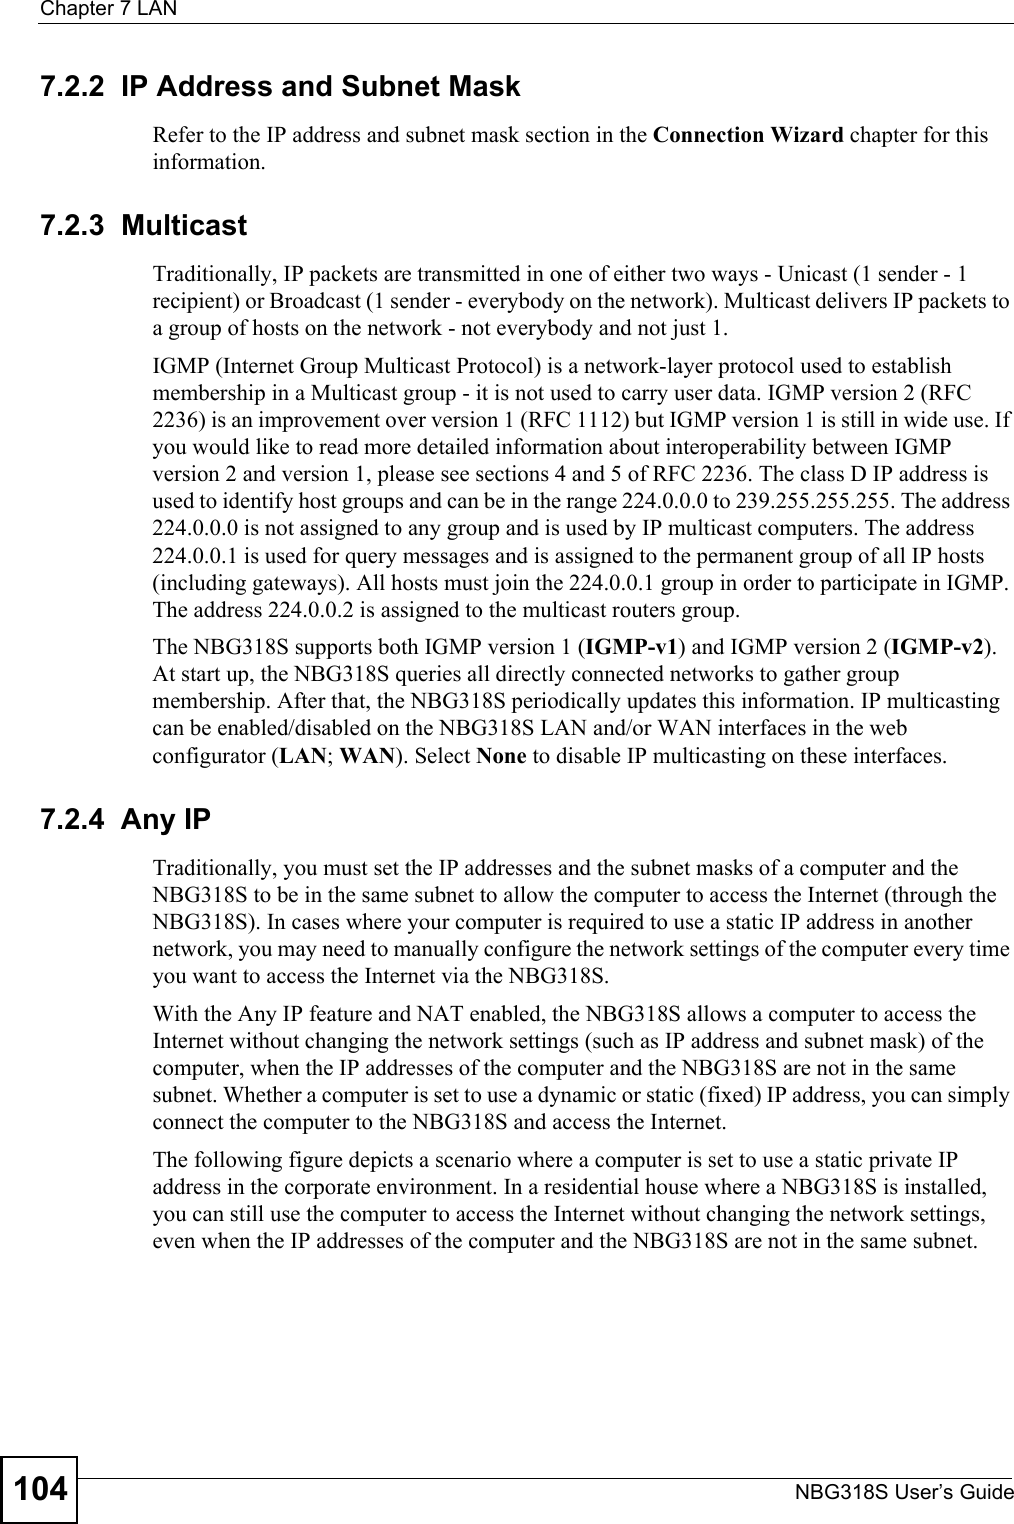 Chapter 7 LANNBG318S User’s Guide1047.2.2  IP Address and Subnet MaskRefer to the IP address and subnet mask section in the Connection Wizard chapter for this information.7.2.3  MulticastTraditionally, IP packets are transmitted in one of either two ways - Unicast (1 sender - 1 recipient) or Broadcast (1 sender - everybody on the network). Multicast delivers IP packets to a group of hosts on the network - not everybody and not just 1. IGMP (Internet Group Multicast Protocol) is a network-layer protocol used to establish membership in a Multicast group - it is not used to carry user data. IGMP version 2 (RFC 2236) is an improvement over version 1 (RFC 1112) but IGMP version 1 is still in wide use. If you would like to read more detailed information about interoperability between IGMP version 2 and version 1, please see sections 4 and 5 of RFC 2236. The class D IP address is used to identify host groups and can be in the range 224.0.0.0 to 239.255.255.255. The address 224.0.0.0 is not assigned to any group and is used by IP multicast computers. The address 224.0.0.1 is used for query messages and is assigned to the permanent group of all IP hosts (including gateways). All hosts must join the 224.0.0.1 group in order to participate in IGMP. The address 224.0.0.2 is assigned to the multicast routers group. The NBG318S supports both IGMP version 1 (IGMP-v1) and IGMP version 2 (IGMP-v2). At start up, the NBG318S queries all directly connected networks to gather group membership. After that, the NBG318S periodically updates this information. IP multicasting can be enabled/disabled on the NBG318S LAN and/or WAN interfaces in the web configurator (LAN; WAN). Select None to disable IP multicasting on these interfaces.7.2.4  Any IPTraditionally, you must set the IP addresses and the subnet masks of a computer and the NBG318S to be in the same subnet to allow the computer to access the Internet (through the NBG318S). In cases where your computer is required to use a static IP address in another network, you may need to manually configure the network settings of the computer every time you want to access the Internet via the NBG318S.With the Any IP feature and NAT enabled, the NBG318S allows a computer to access the Internet without changing the network settings (such as IP address and subnet mask) of the computer, when the IP addresses of the computer and the NBG318S are not in the same subnet. Whether a computer is set to use a dynamic or static (fixed) IP address, you can simply connect the computer to the NBG318S and access the Internet.The following figure depicts a scenario where a computer is set to use a static private IP address in the corporate environment. In a residential house where a NBG318S is installed, you can still use the computer to access the Internet without changing the network settings, even when the IP addresses of the computer and the NBG318S are not in the same subnet. 